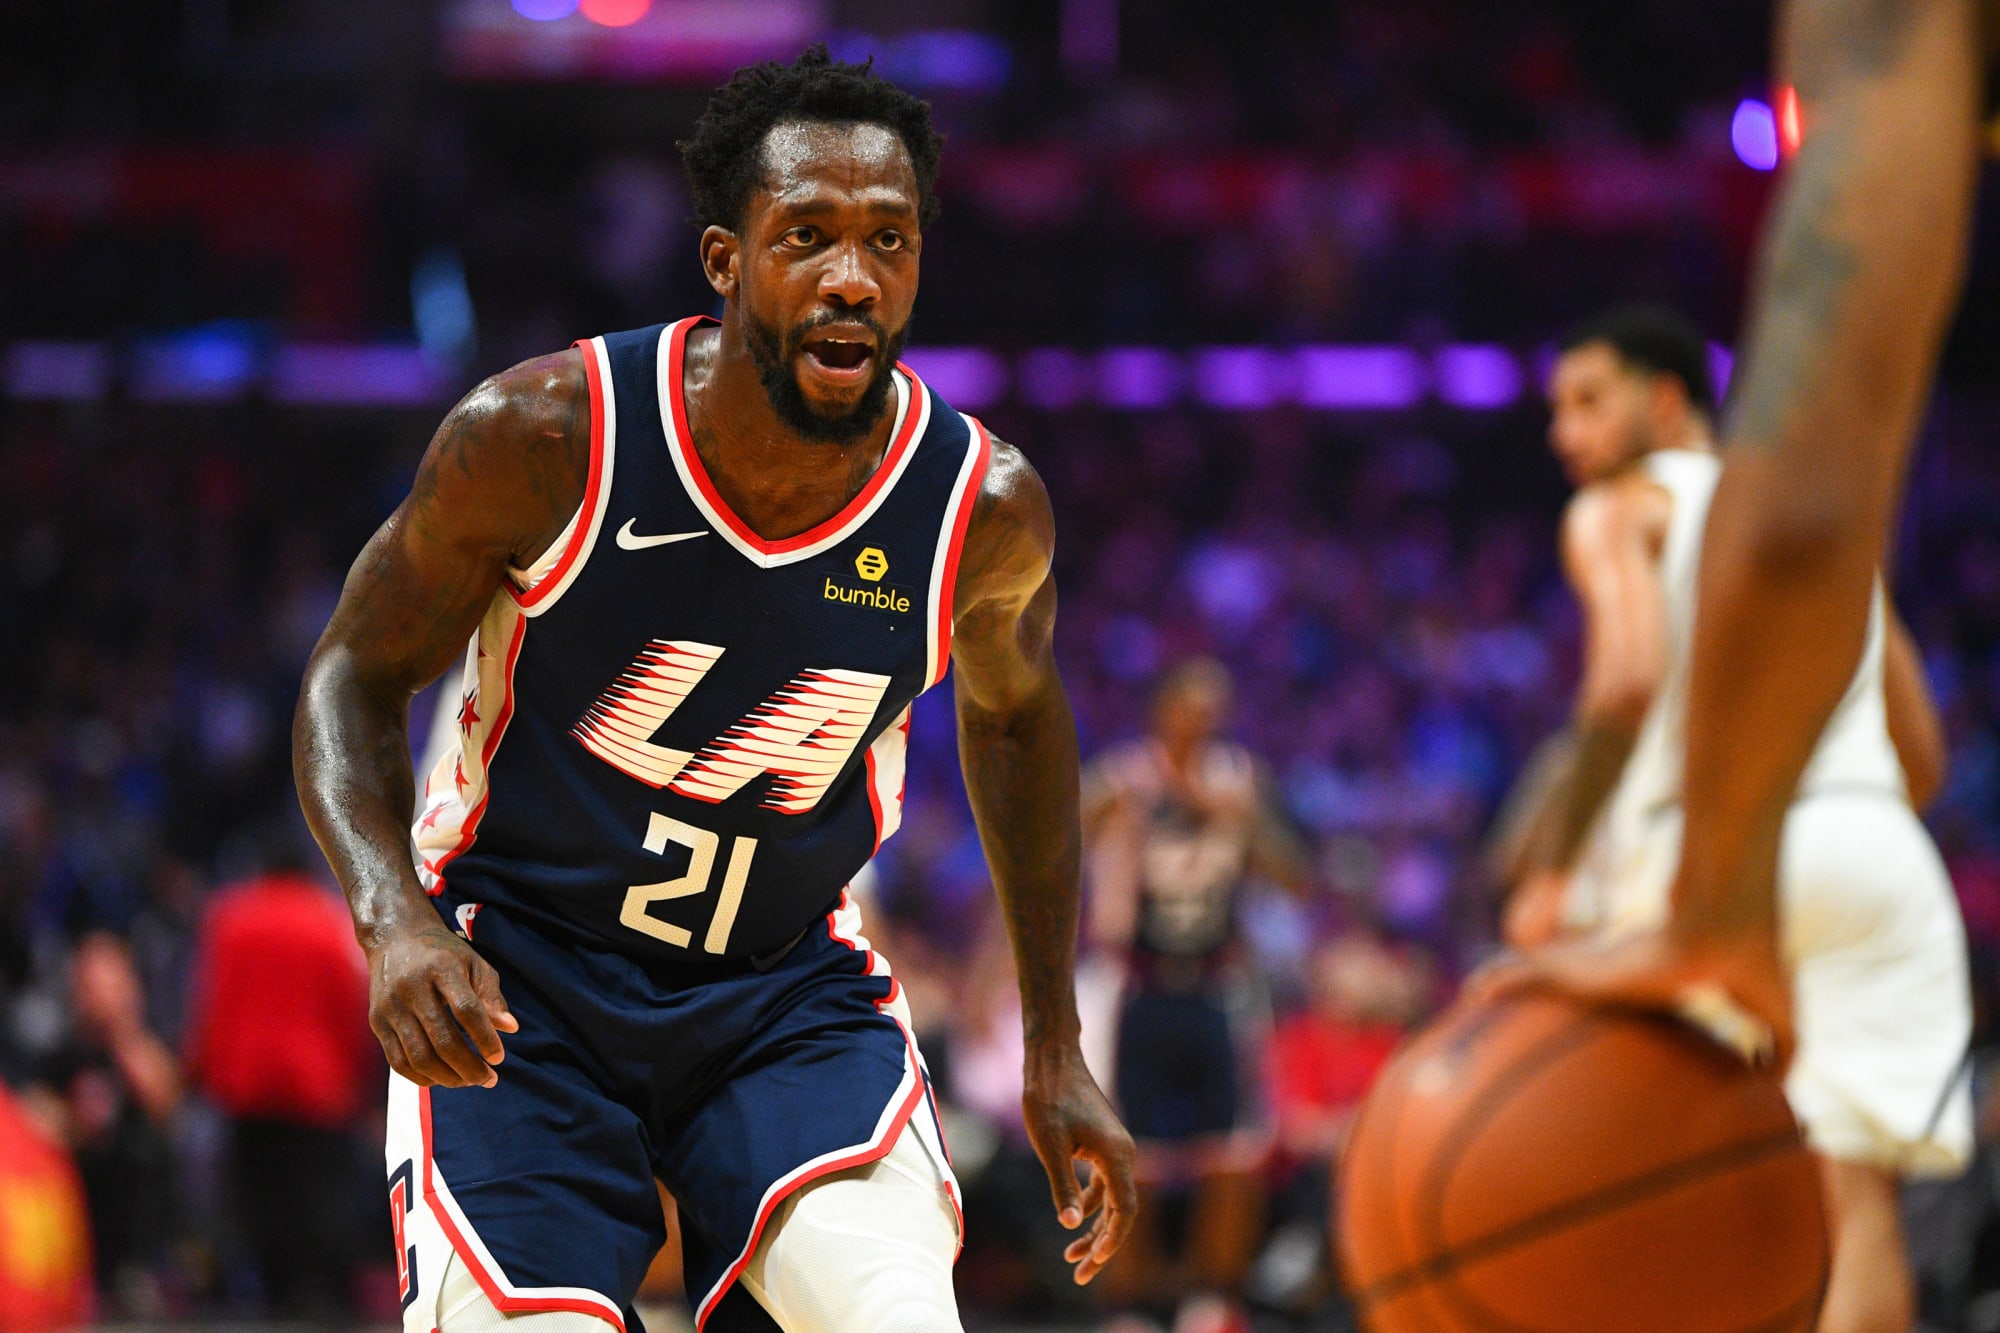 LA Clippers: Patrick Beverly courtside Zubac jersey shows Clips love